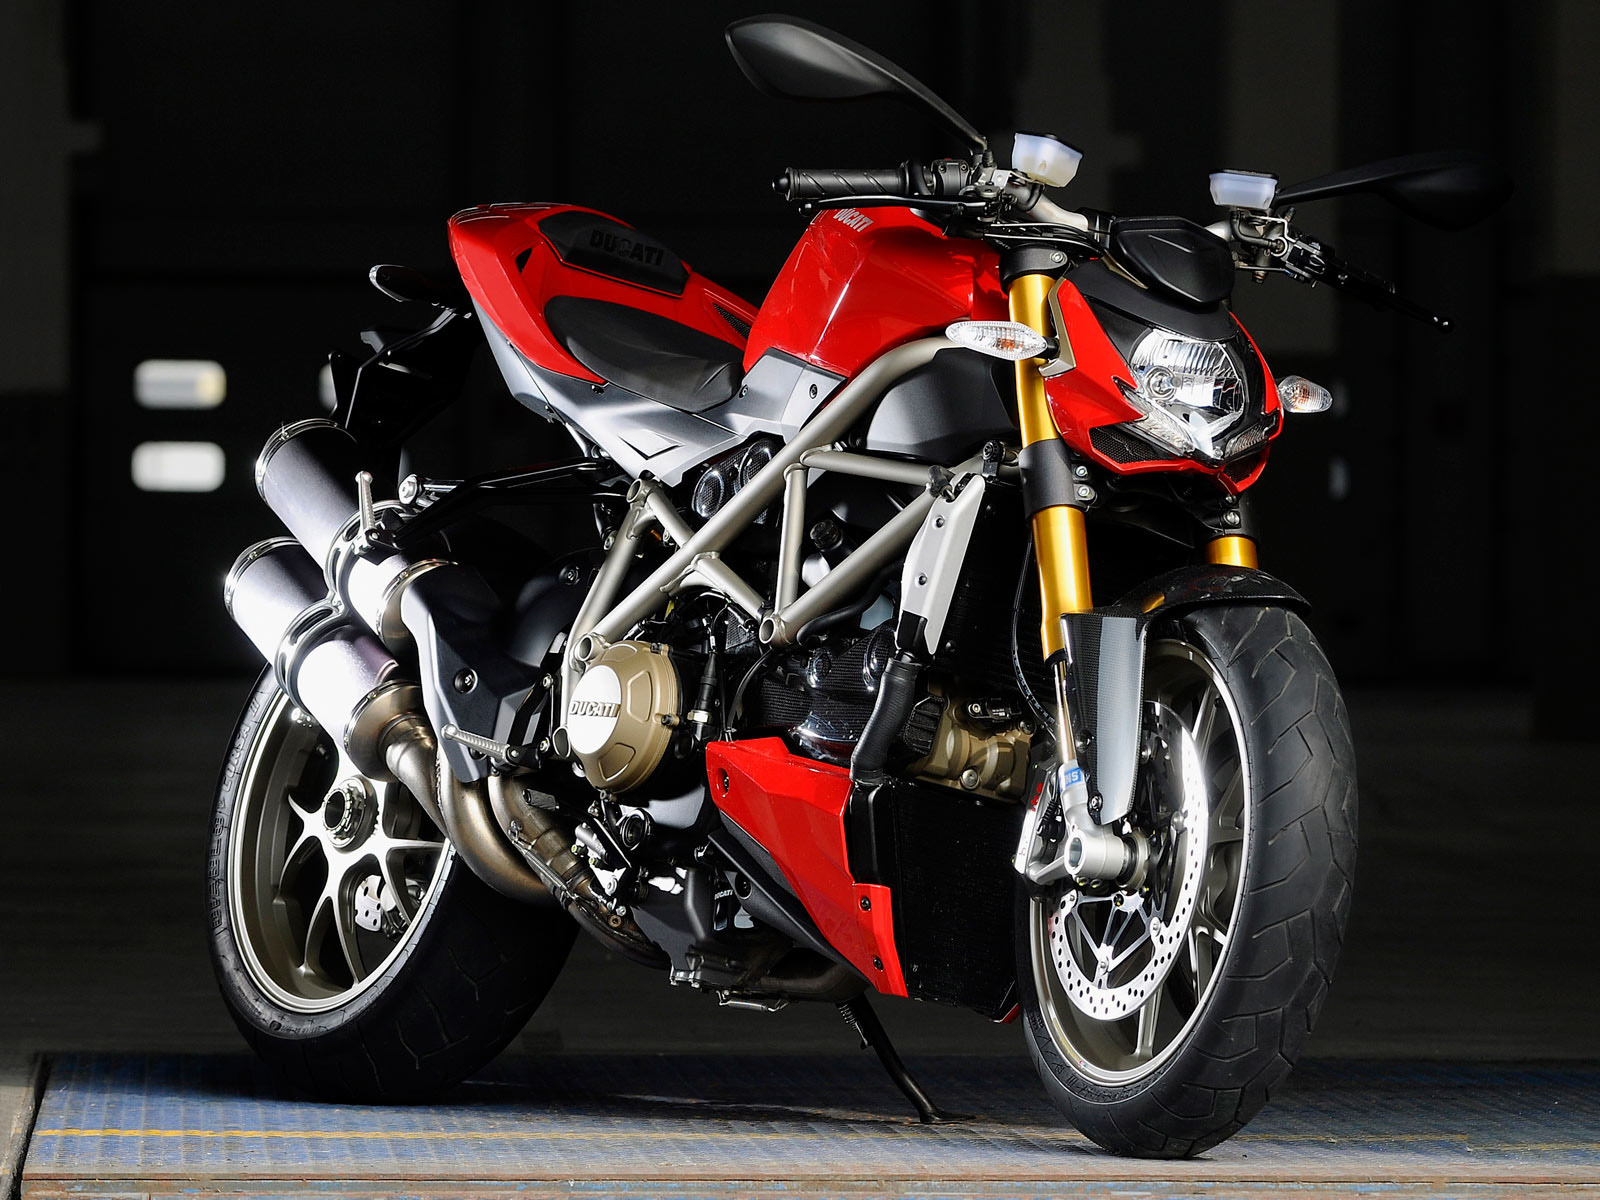 Download full size red Ducati Motorcycle wallpaper / 1600x1200